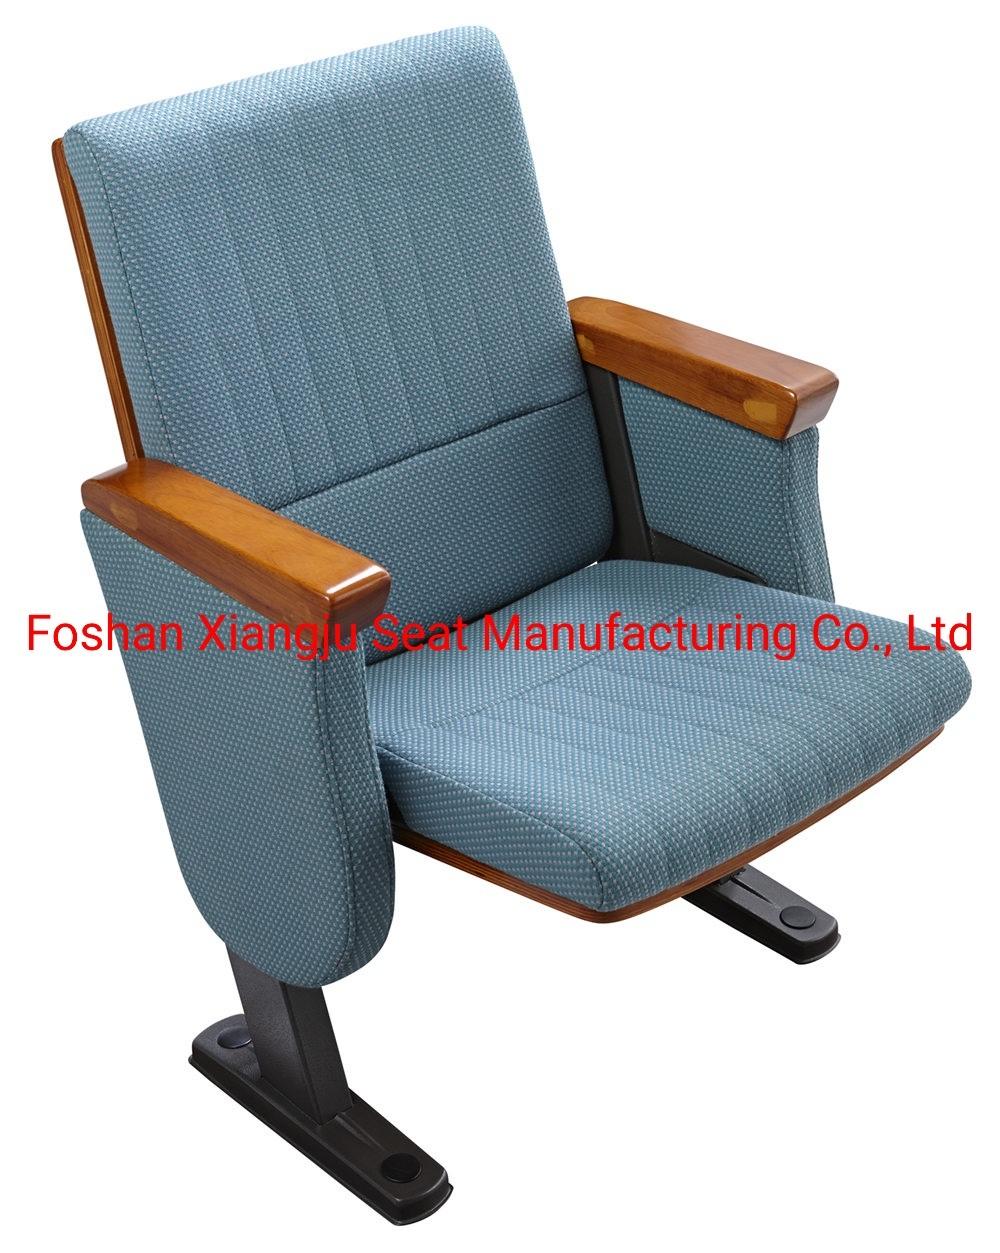 Fashionable Business Church Lecture Cinema Seat Theater Chair